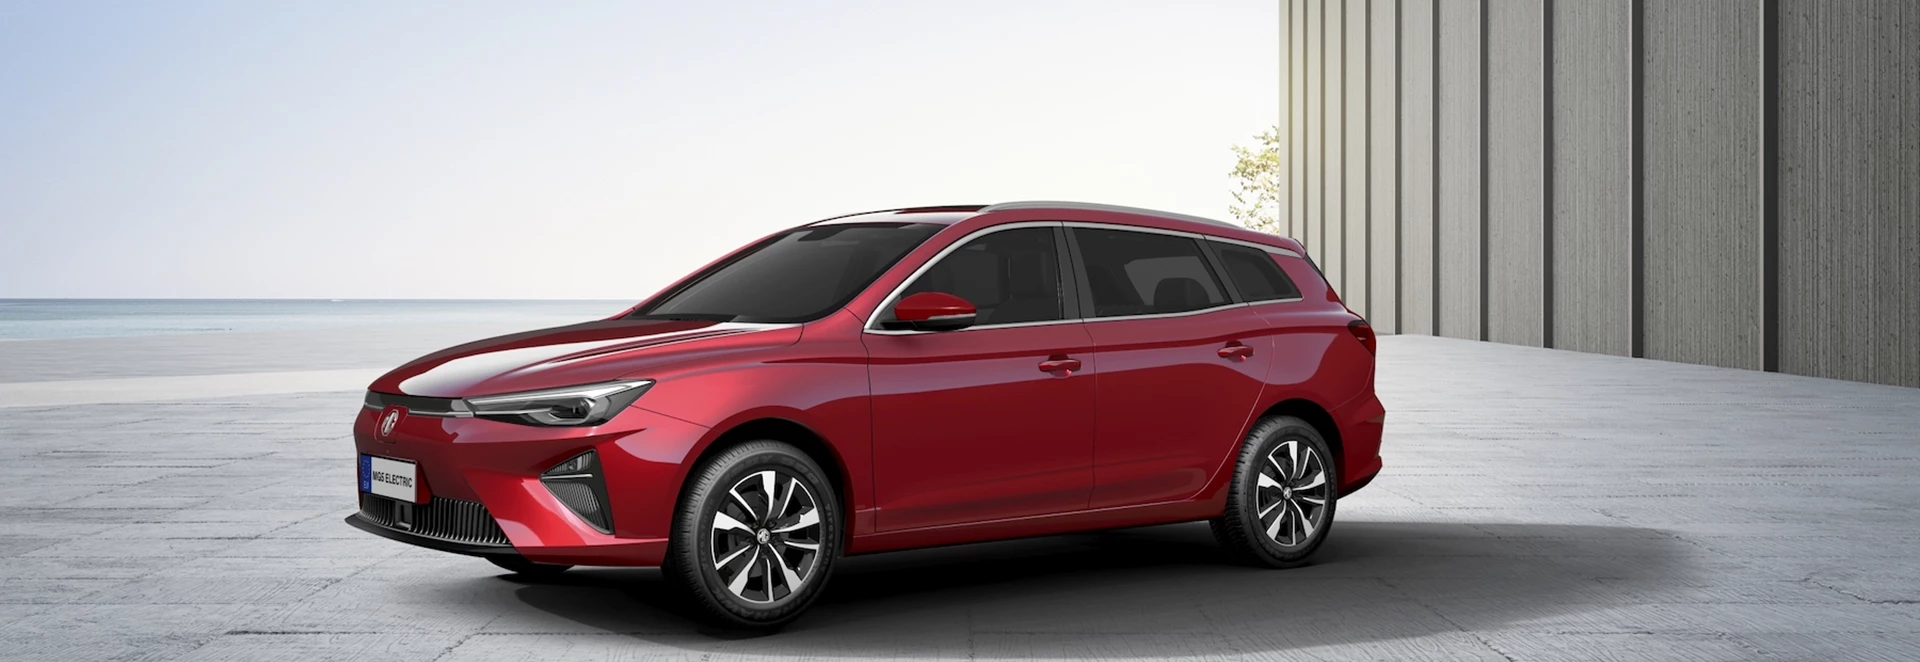 Updated MG5 EV revealed with longer 249-mile electric range 